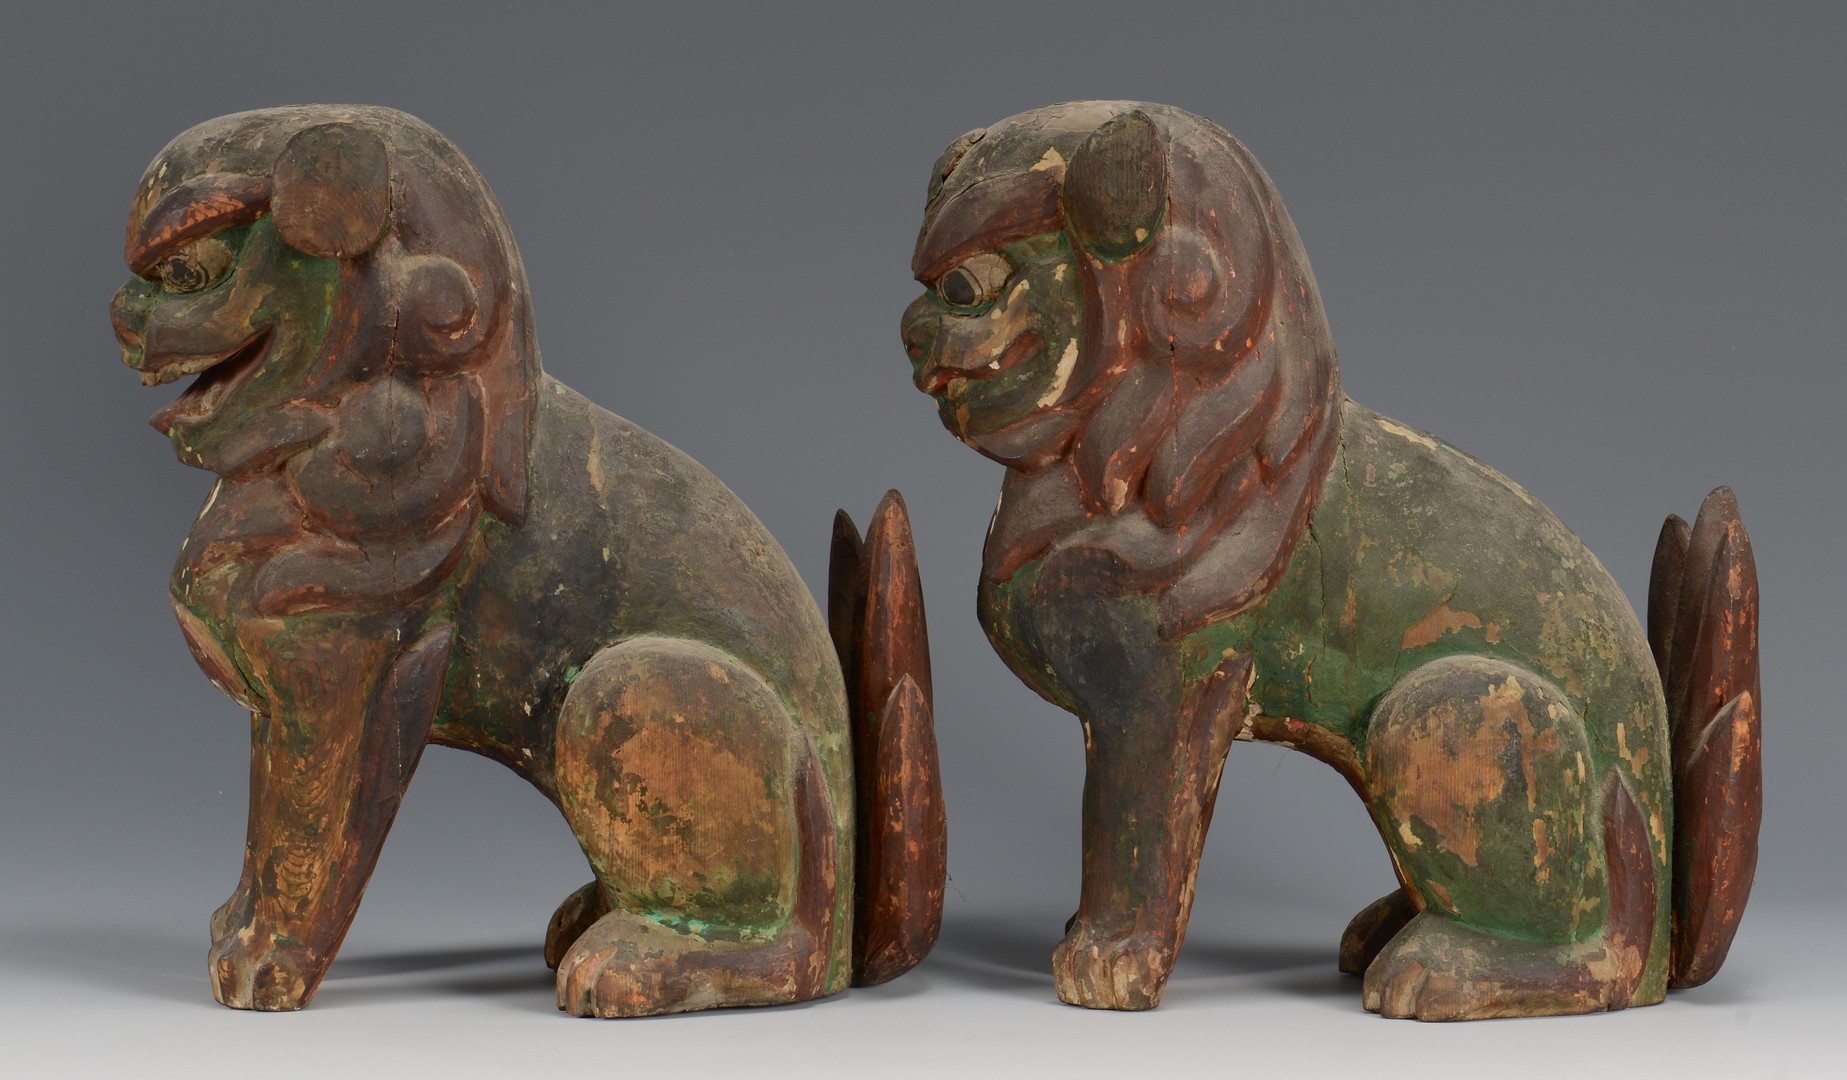 Lot 11: Carved Quan Yin and Foo Dogs